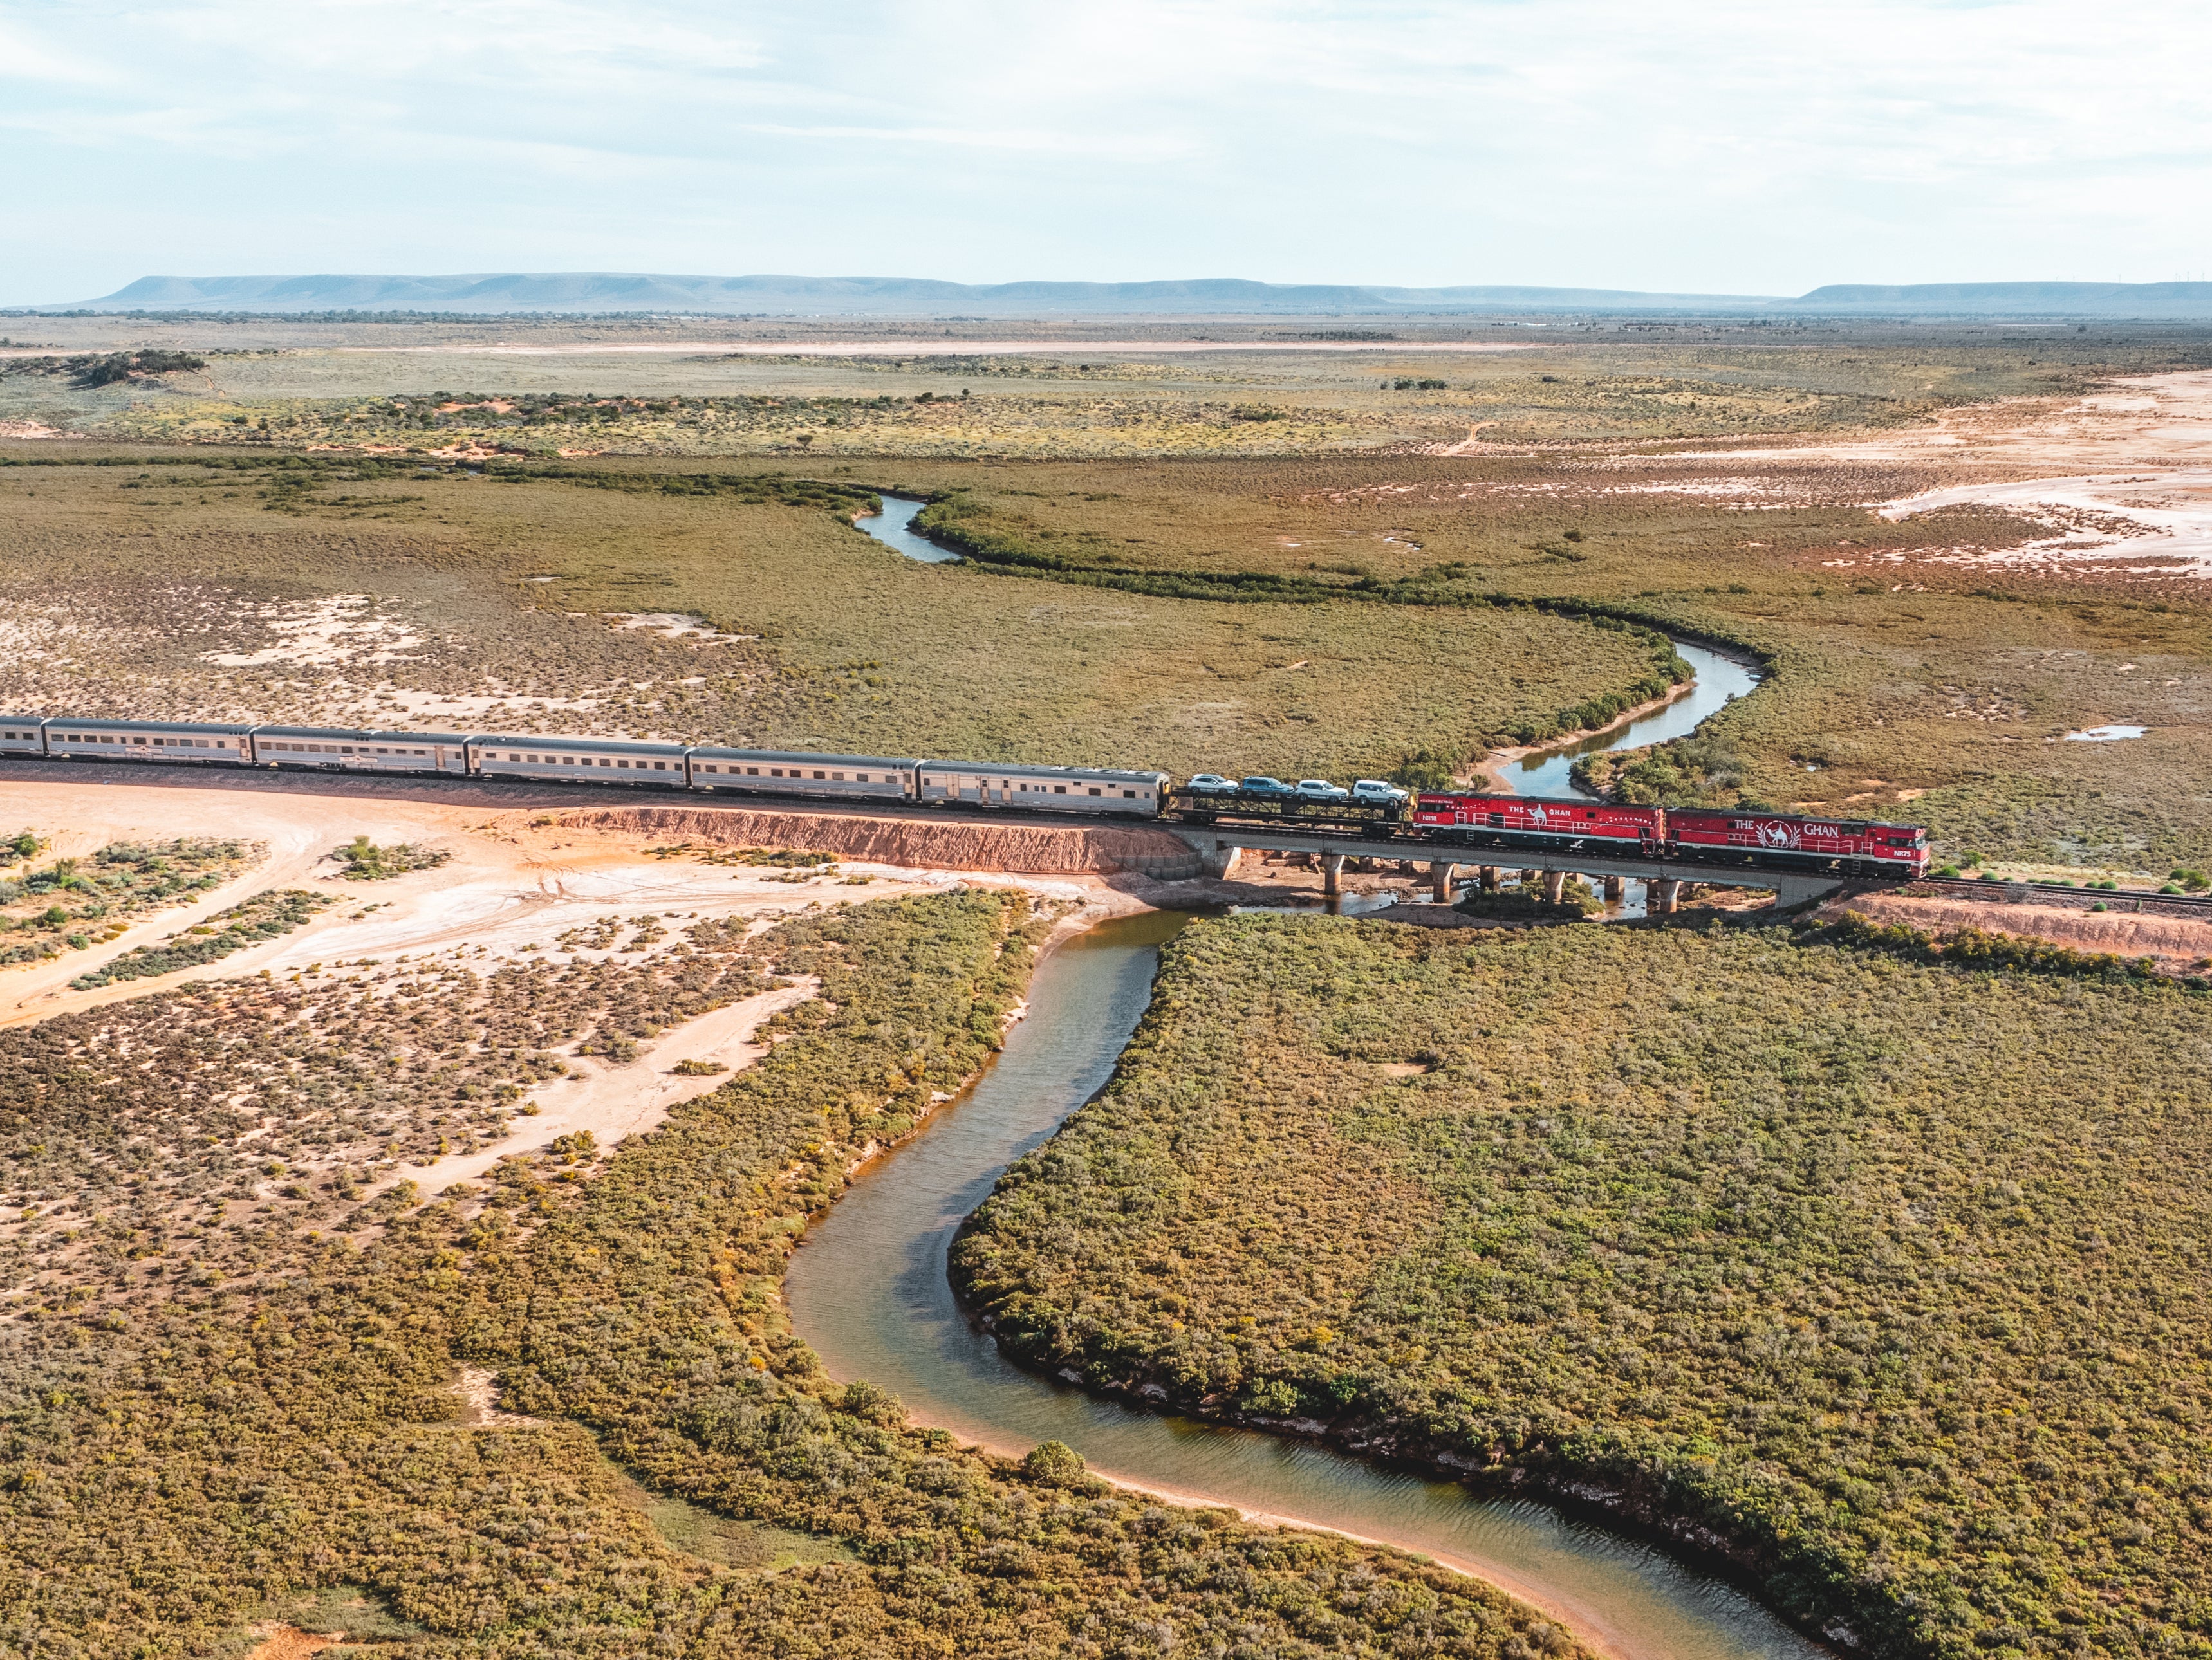 The Adelaide–Darwin railway line is almost 2,000 miles long